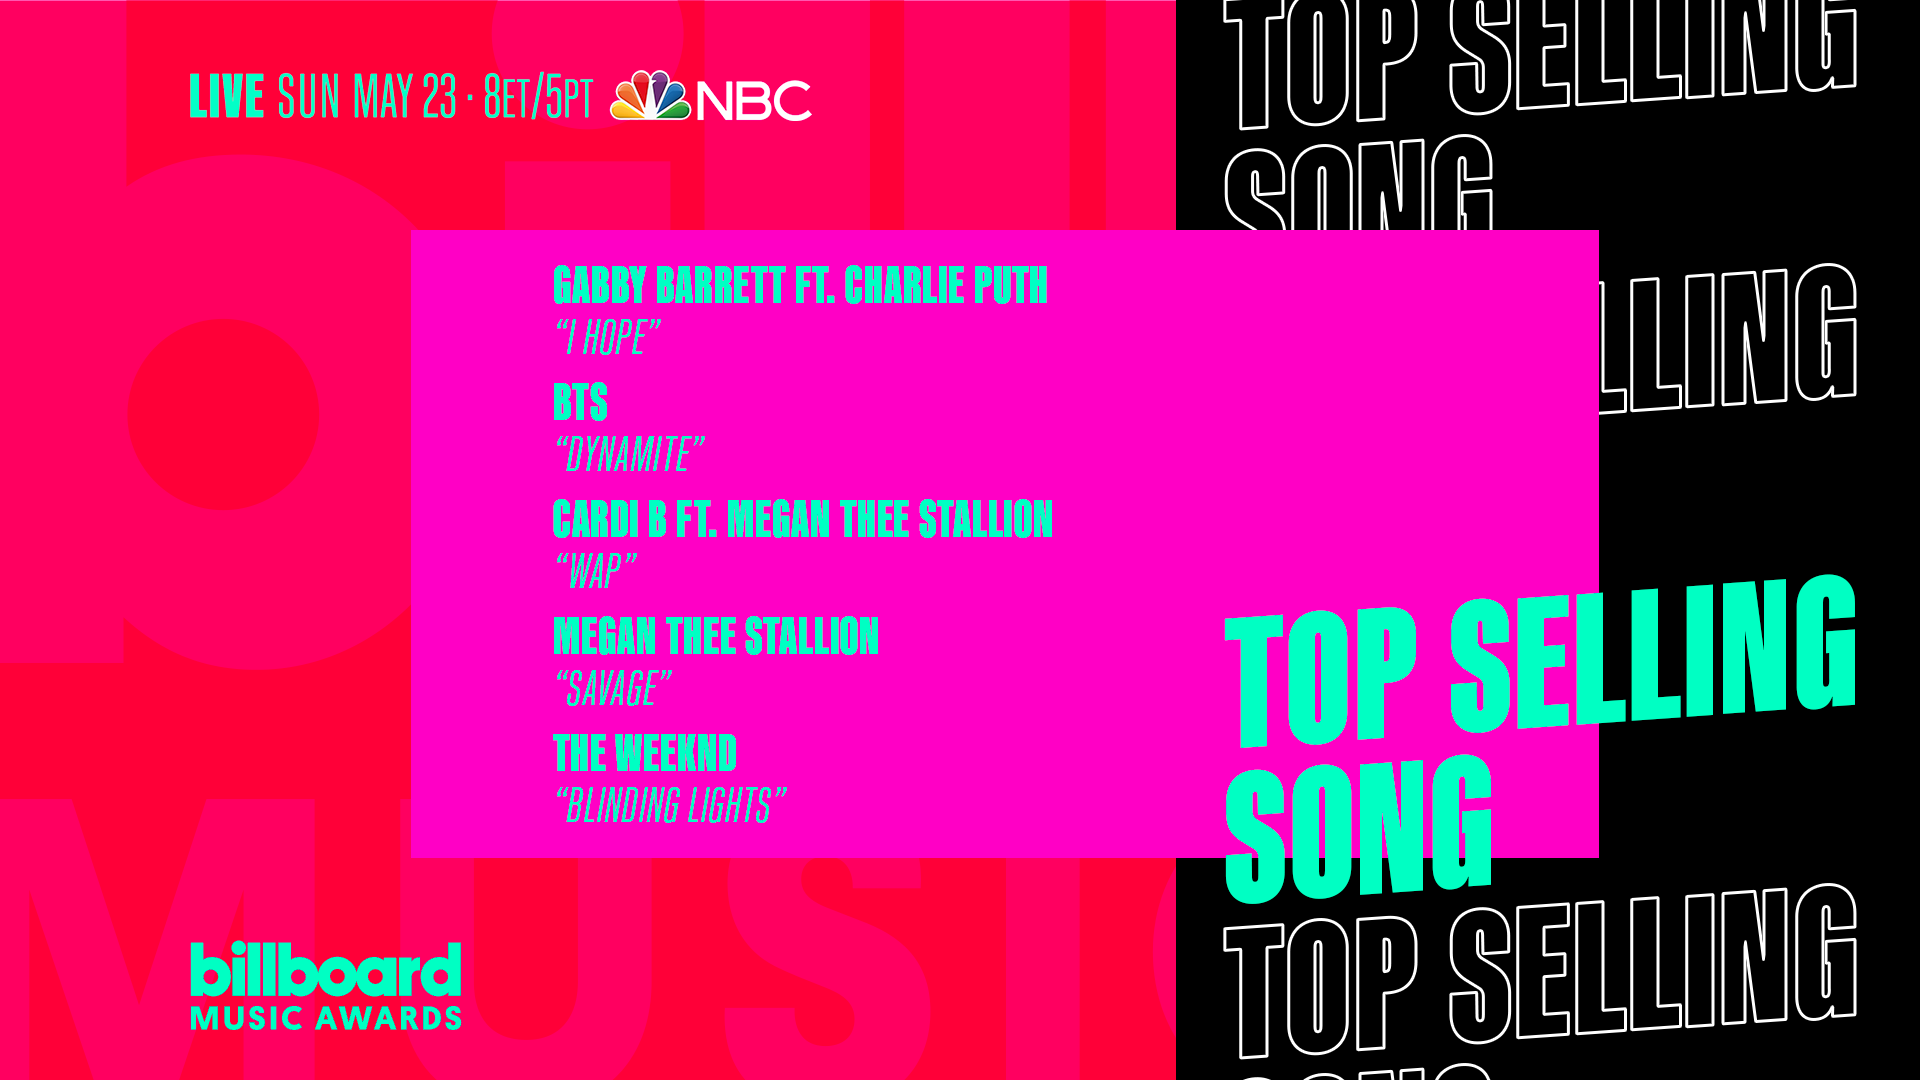 Gabby Barrett and Charlie Puth are nominated for Top Selling Song at the 2021 Billboard Music Awards.
